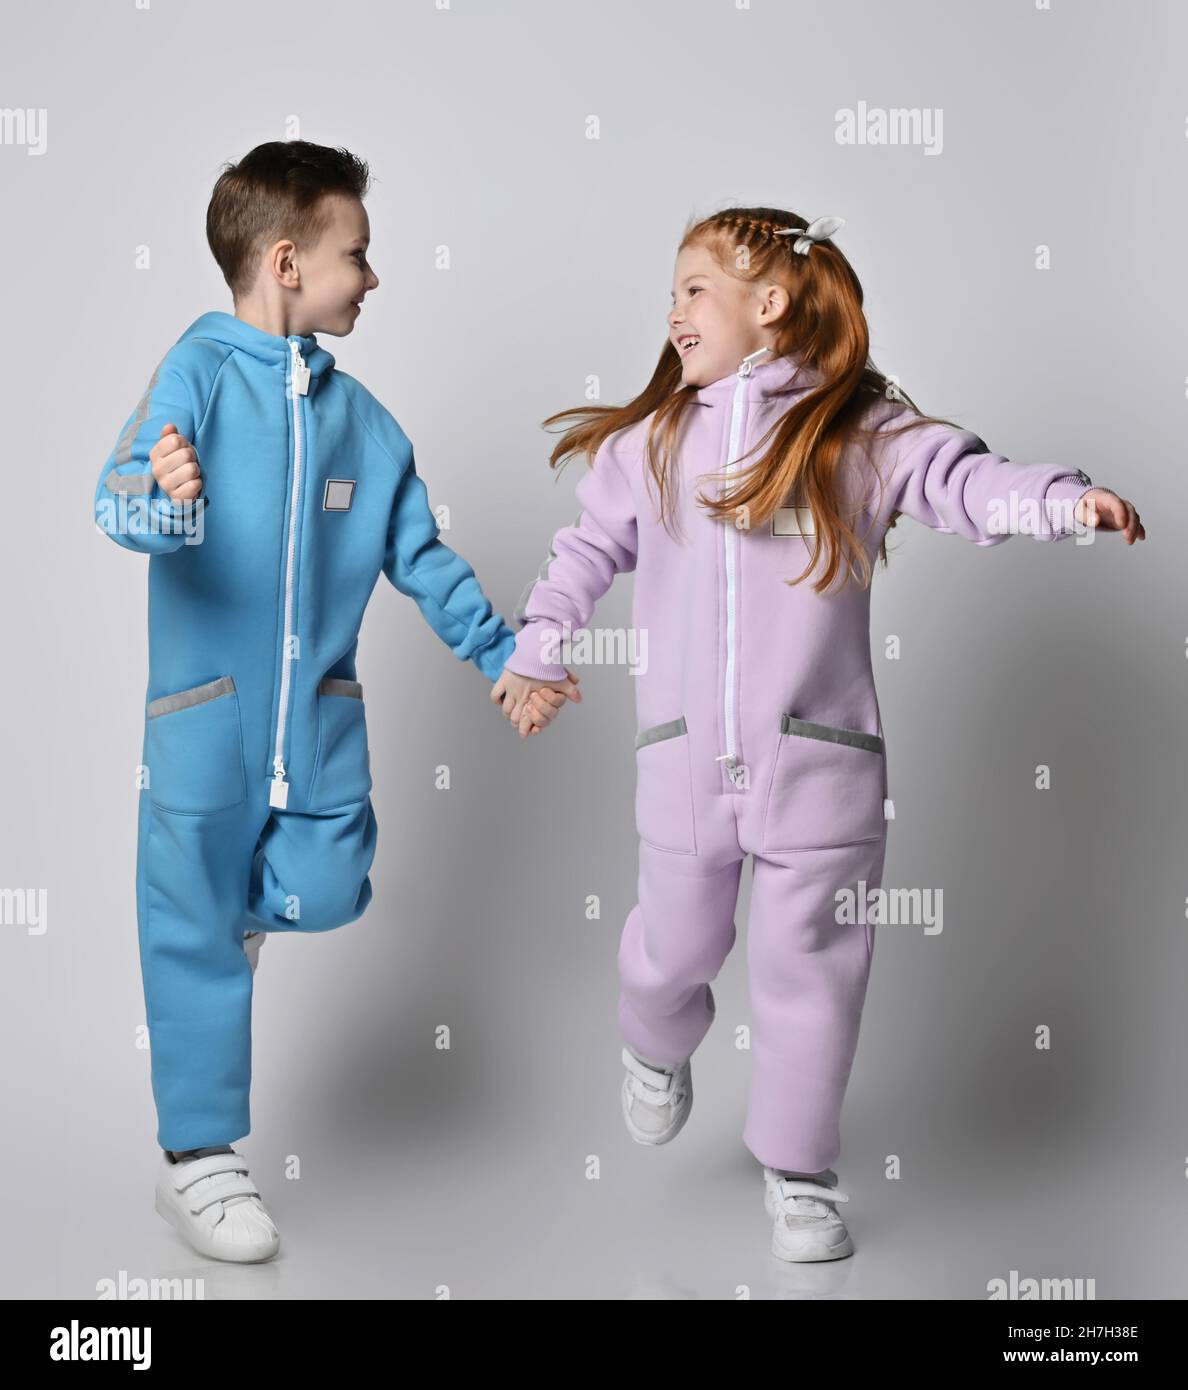 Playful frolic kids boy and girl in blue and pink jumpsuits with are running together looking at each other Stock Photo